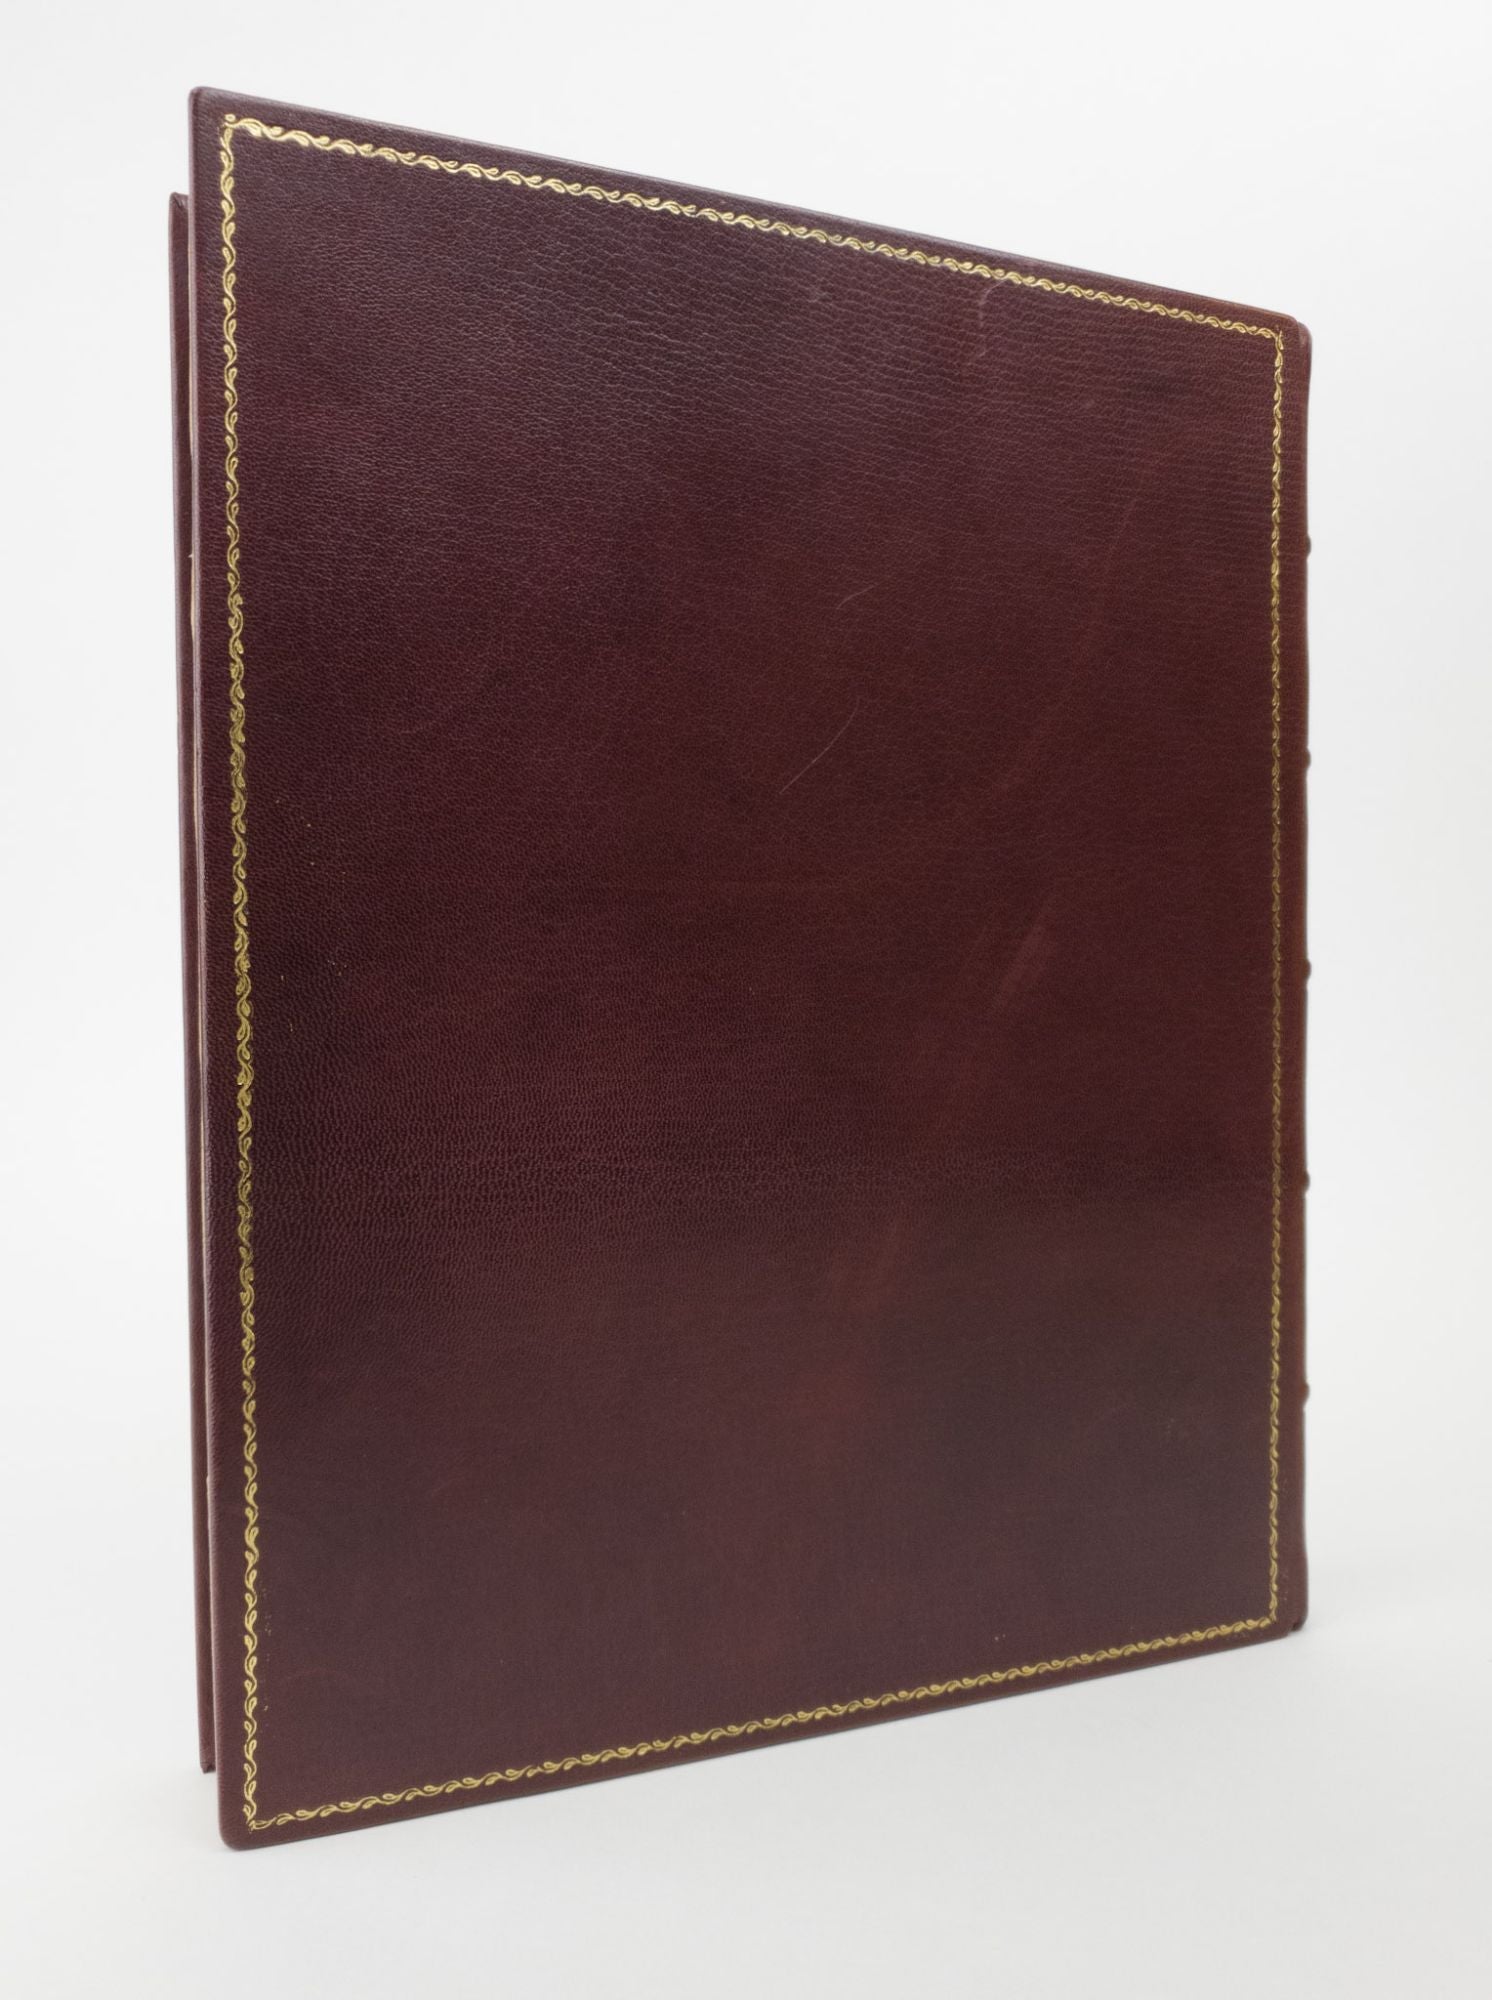 Product Image for SHE STOOPS TO CONQUER OR THE MISTAKES OF A NIGHT [Inscribed By Rudyard Kipling]